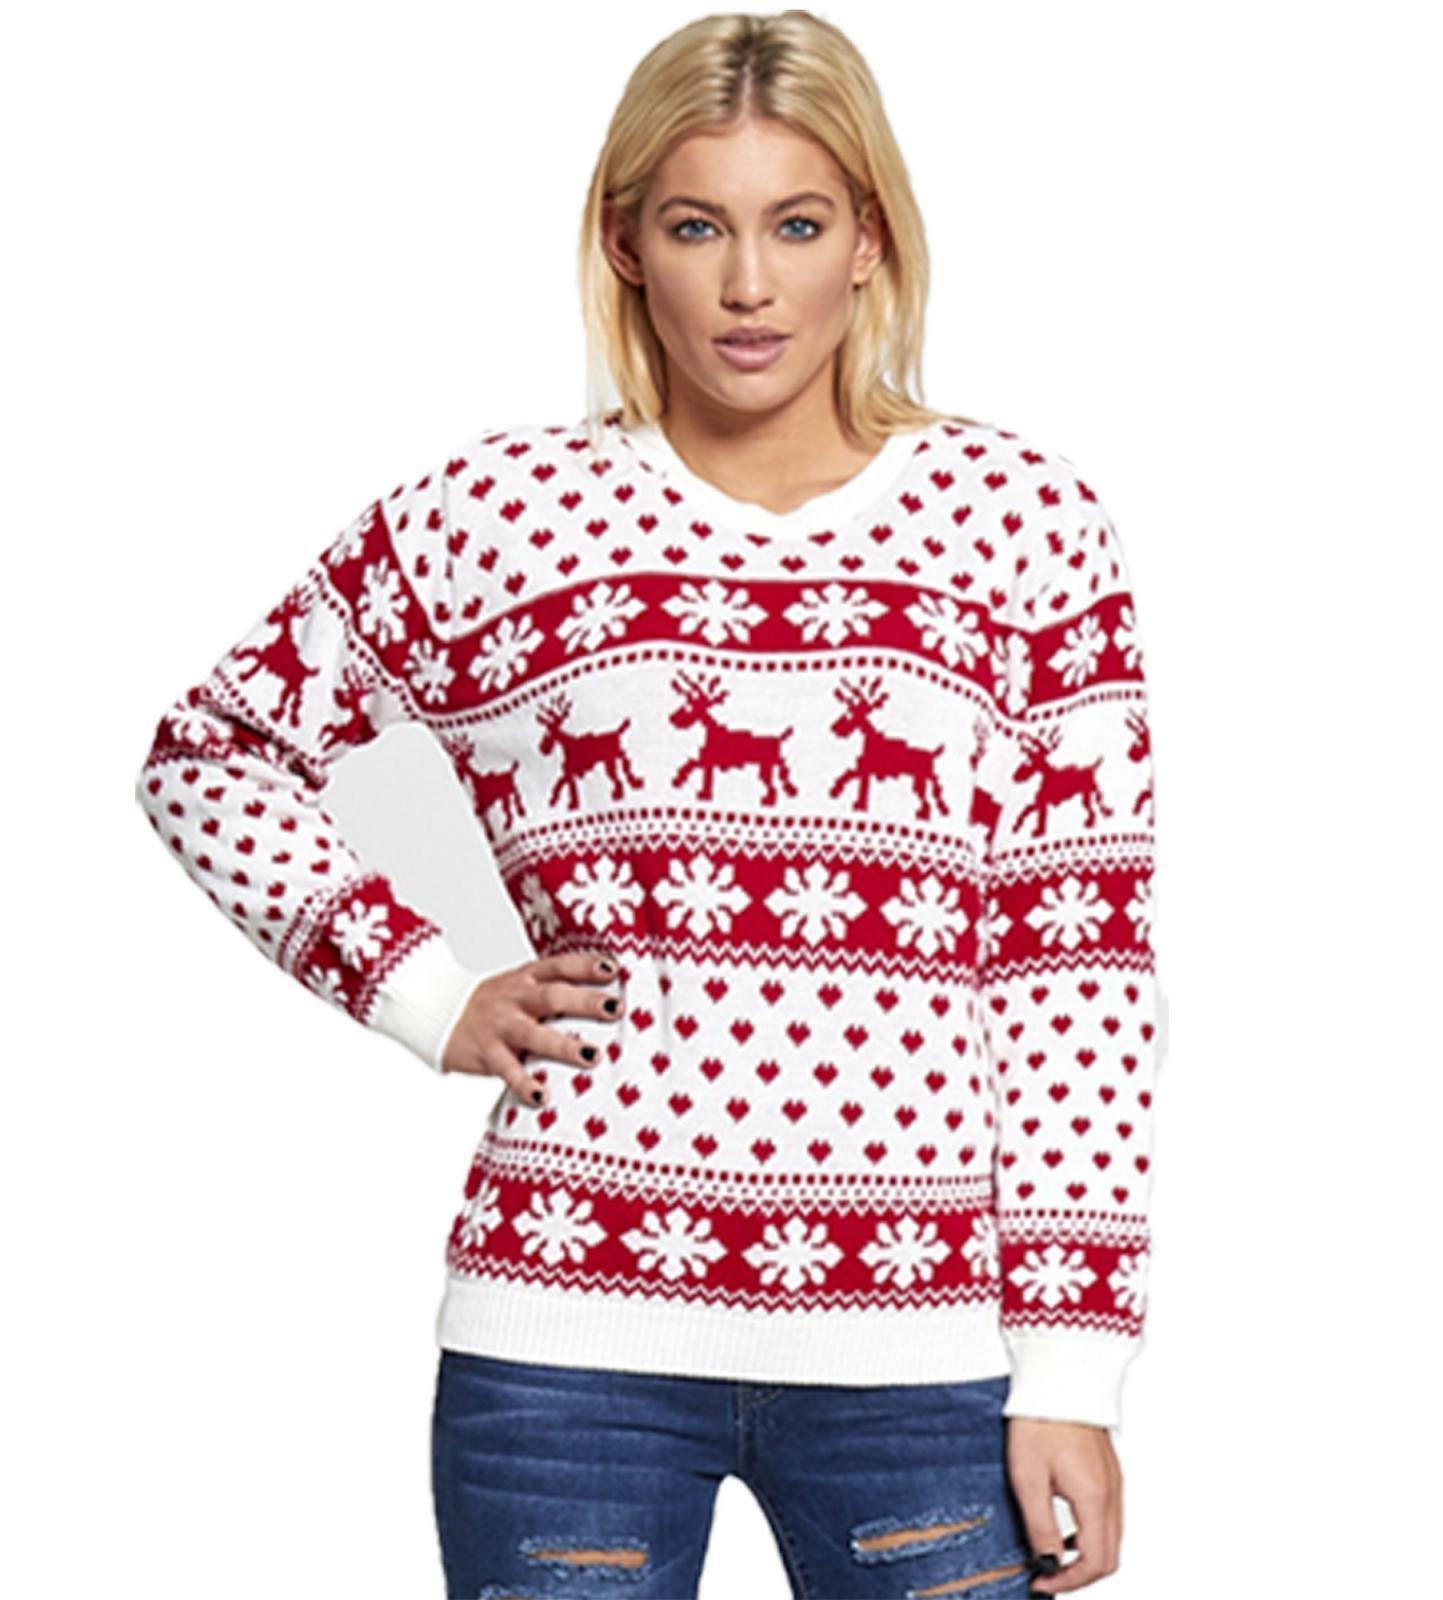 Ladies White & Red Rudolph Novelty Christmas Jumper.